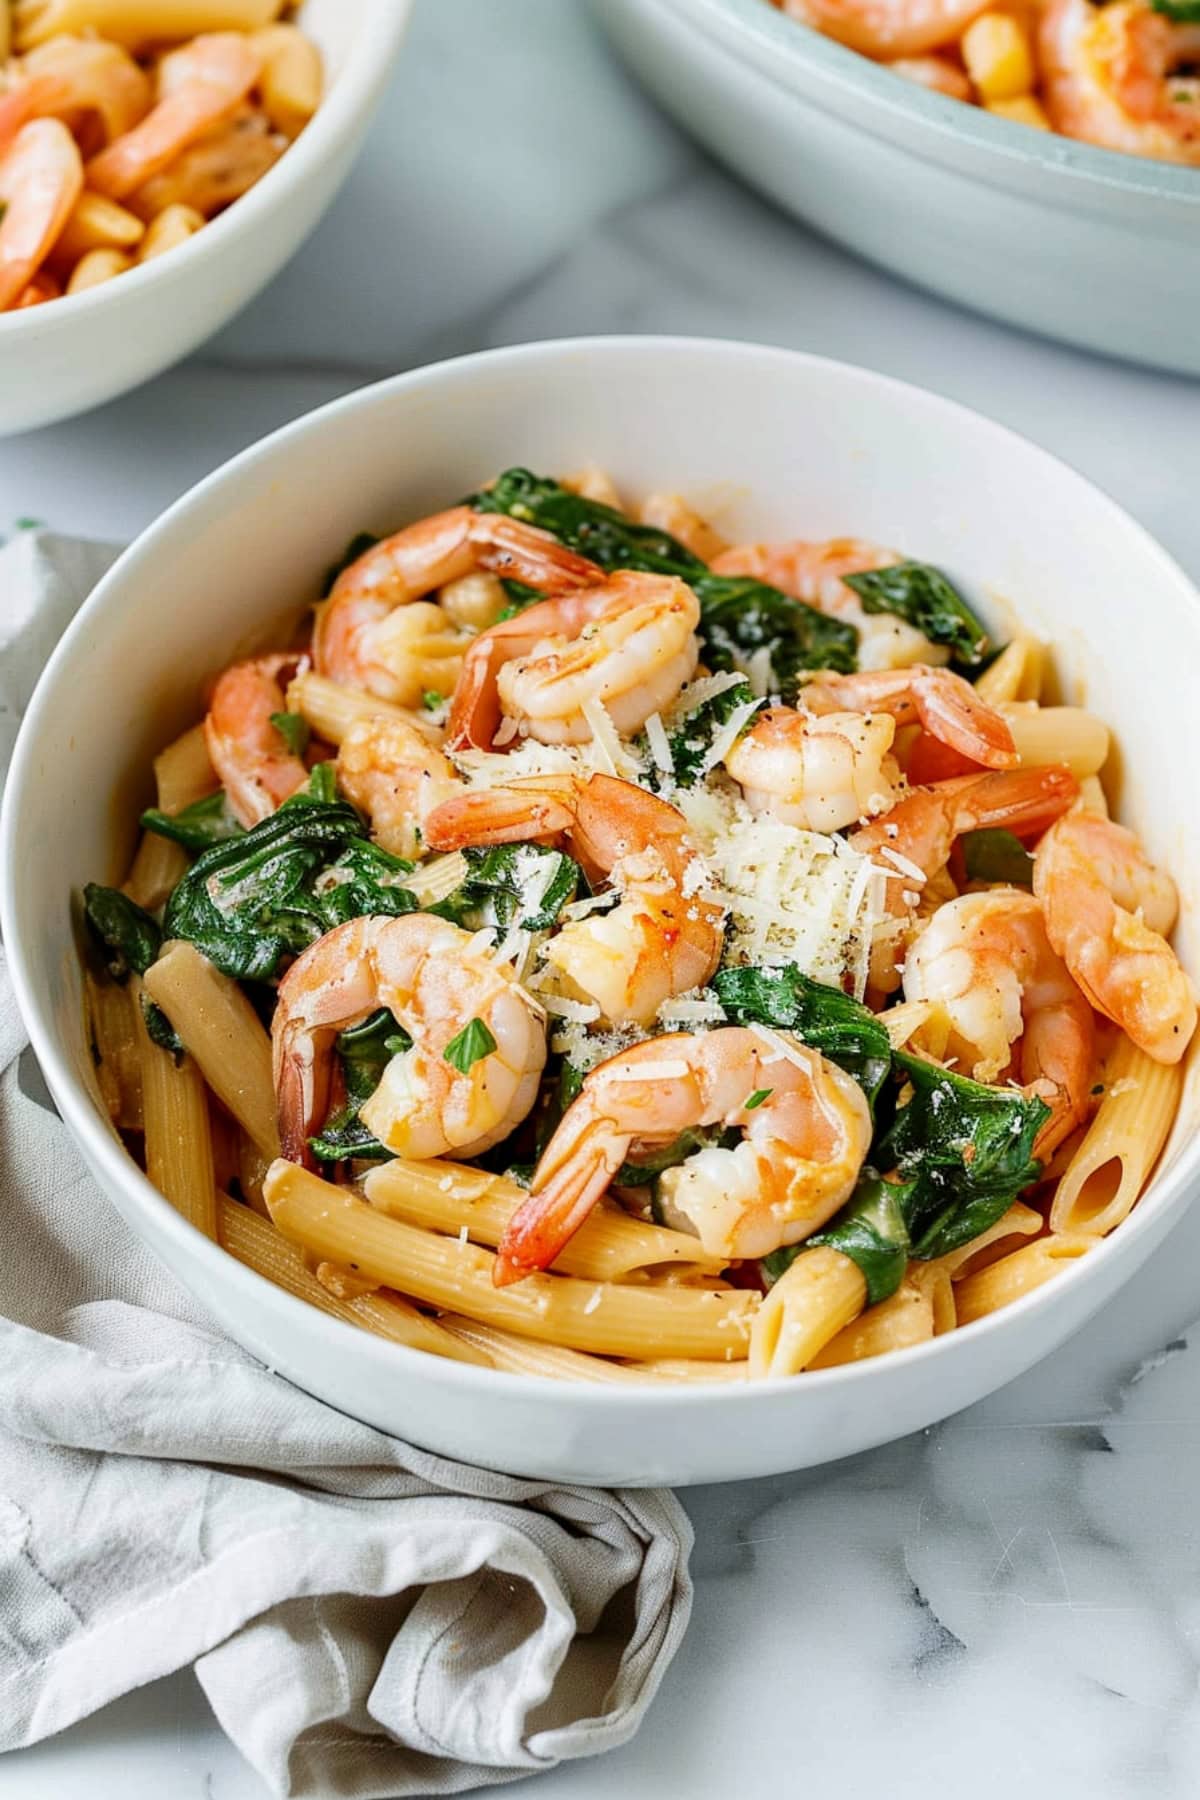 Savory shrimp and spinach pasta, topped with grated parmesan cheese in a white bowl.